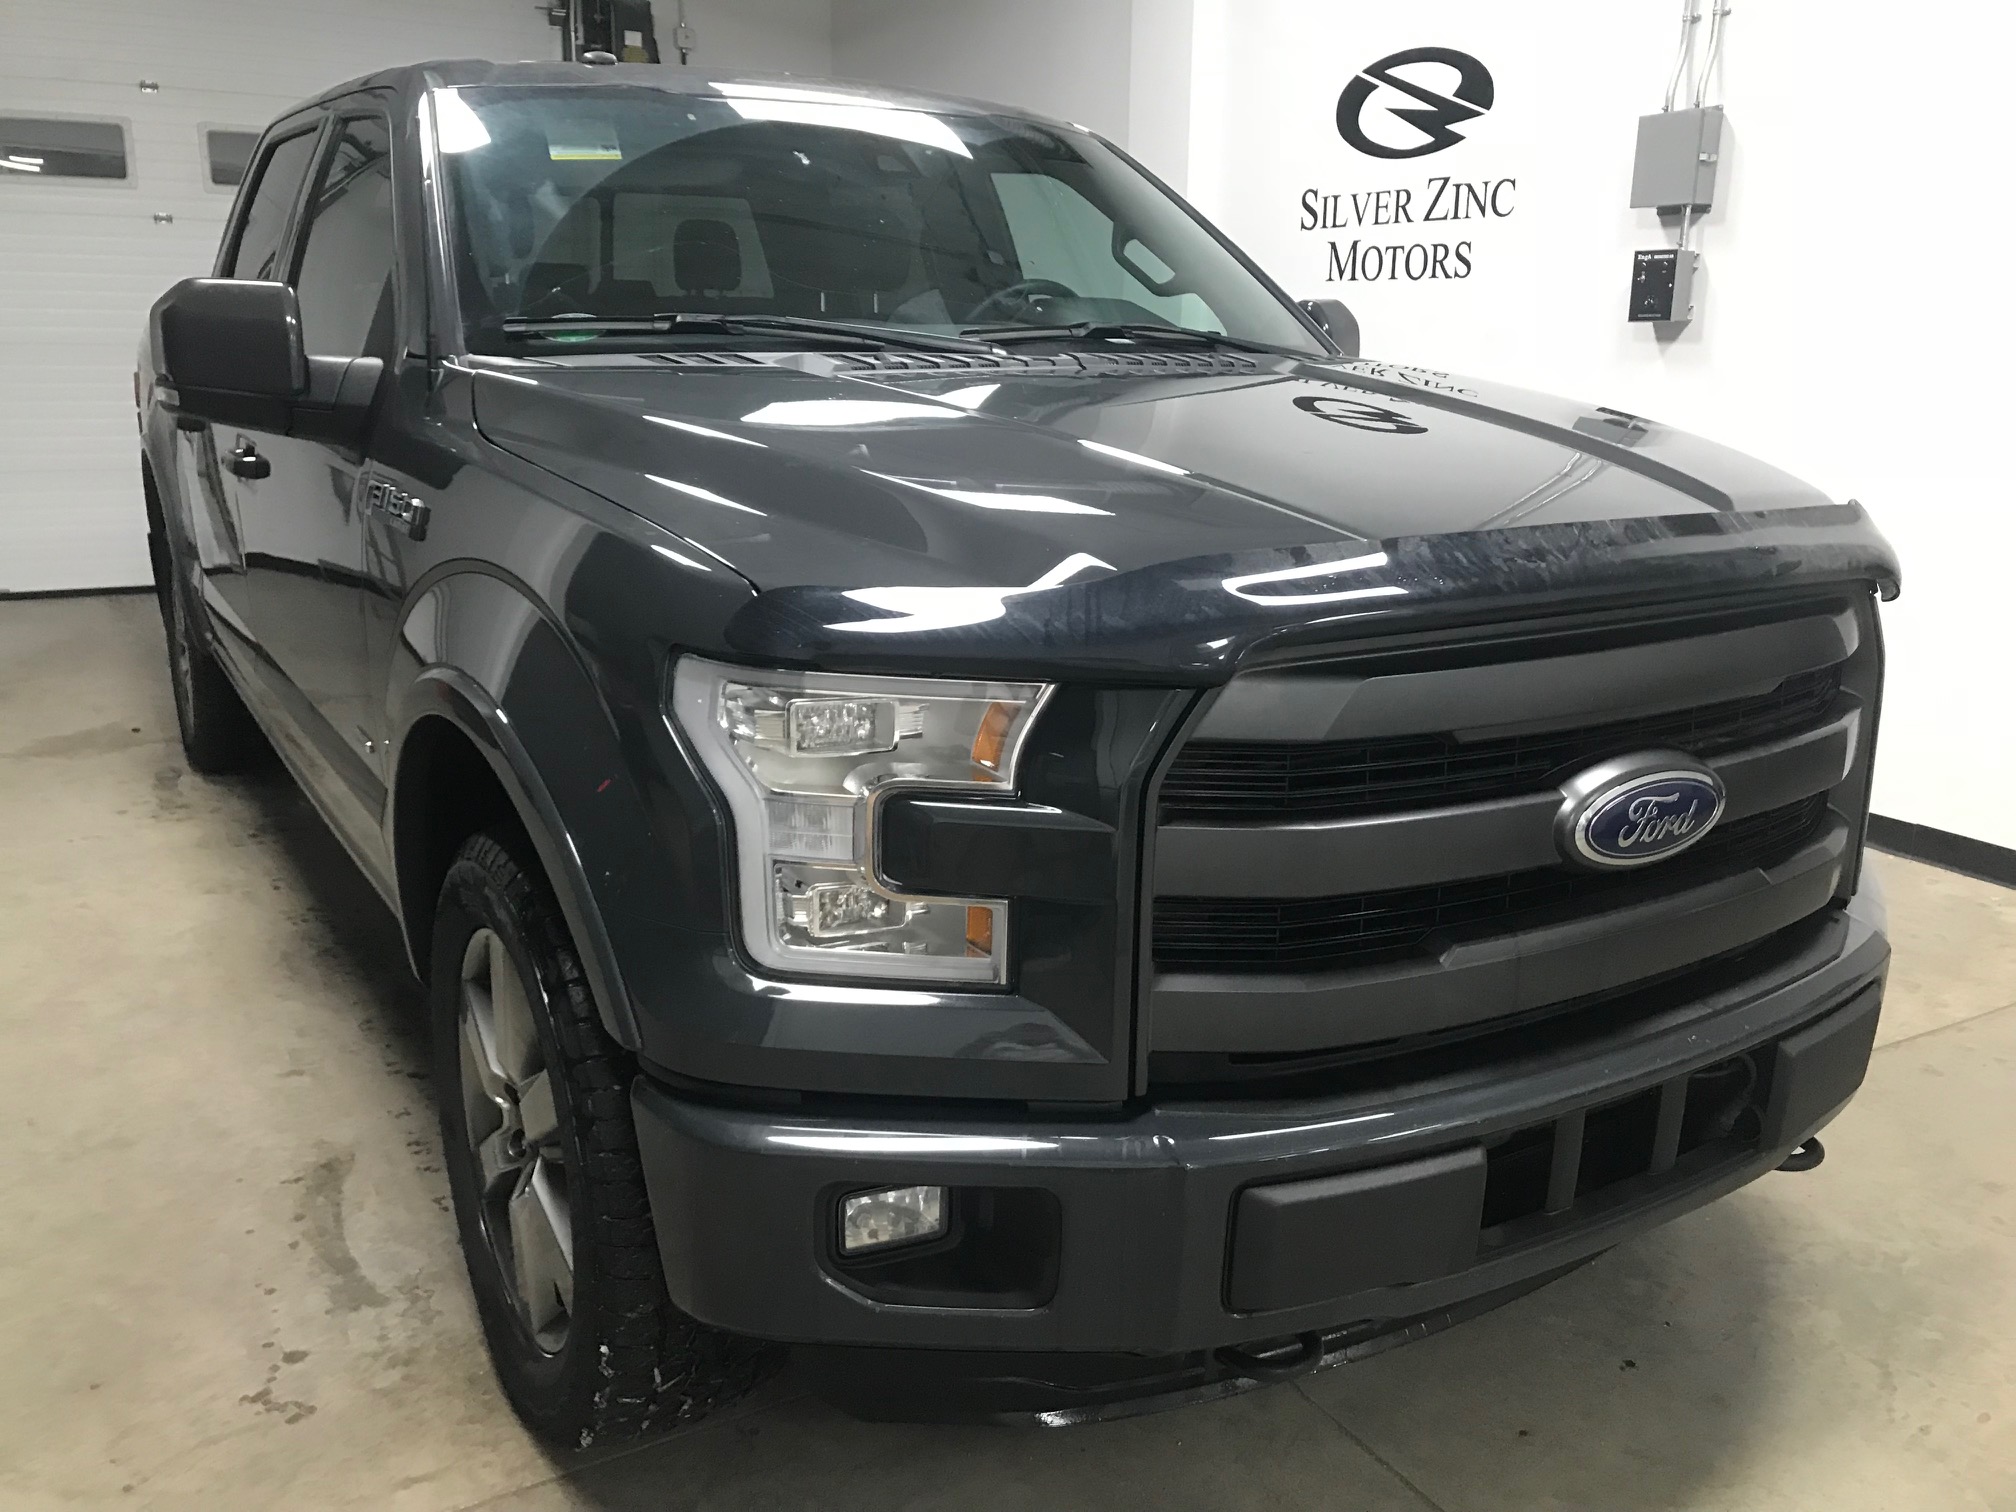 2016 Ford F 150 Lariat 502a Pkg Loaded Sport 1owner Top Opt